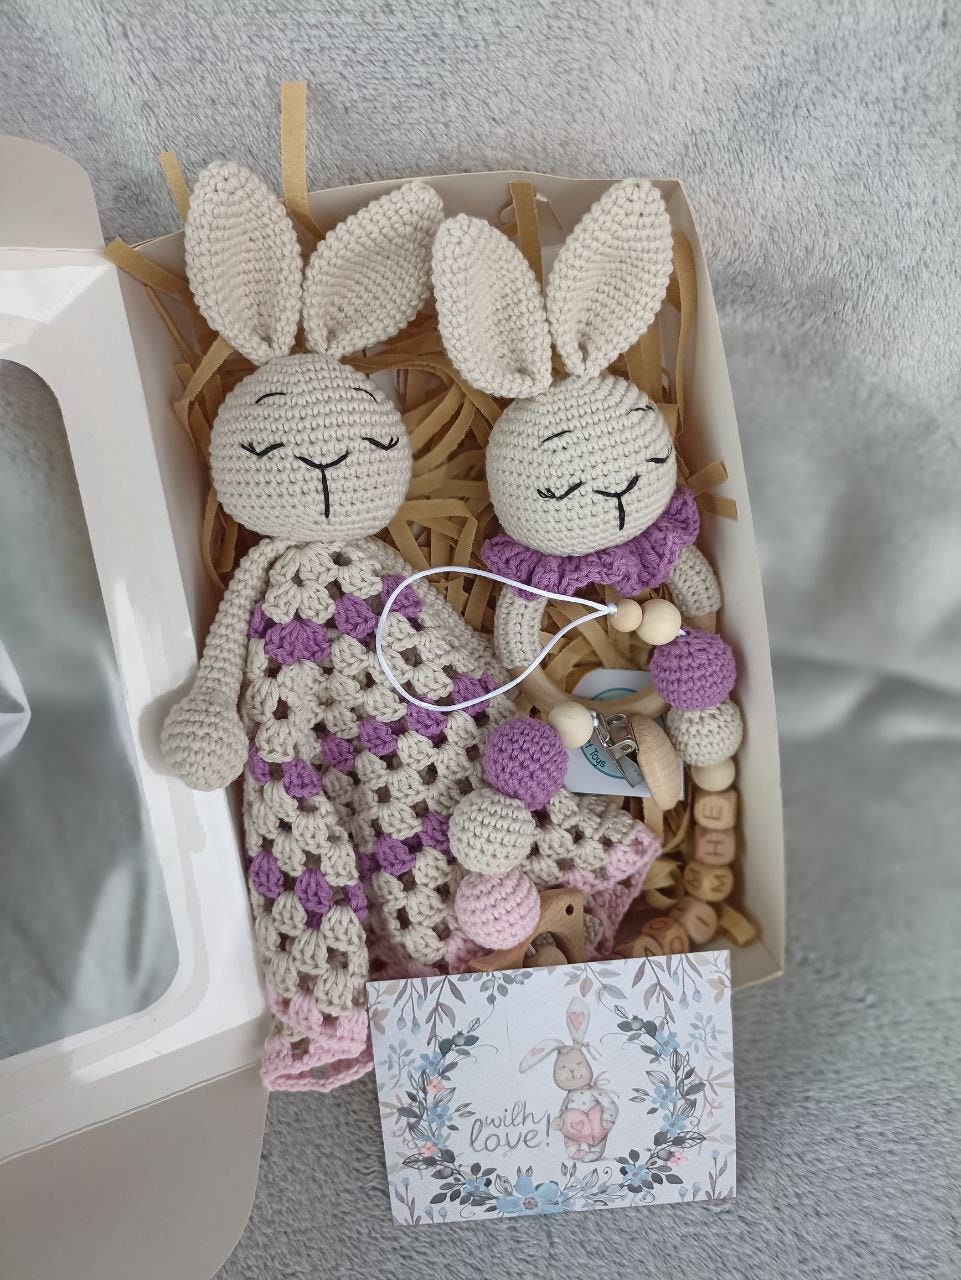 Crochet Kit Bunny, Craft Set for Adults, Amigurumi Set, Crochet Kit Beginner,  Learn to Crochet Set, Christmas Gift, Birthday Gift for Friend 